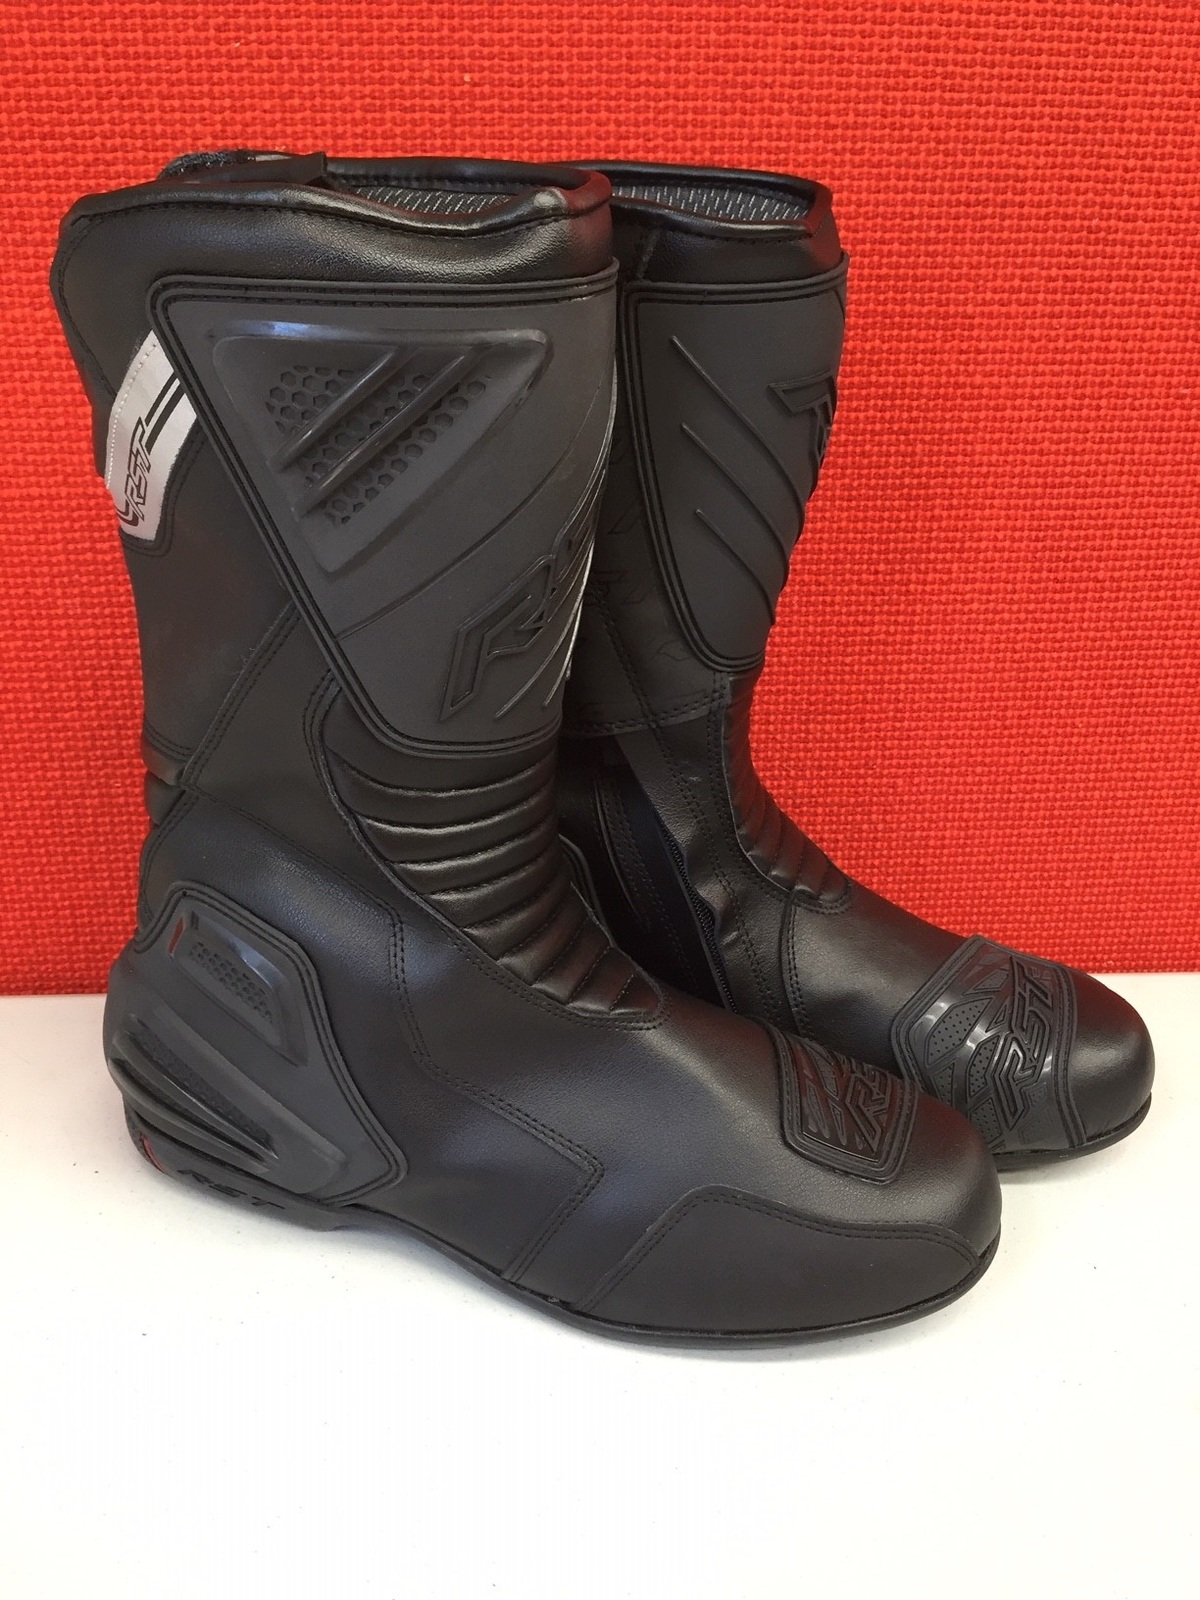 RST Paragon 2 Waterproof Motorcycle Boots - Black - Size 44: MASH ...